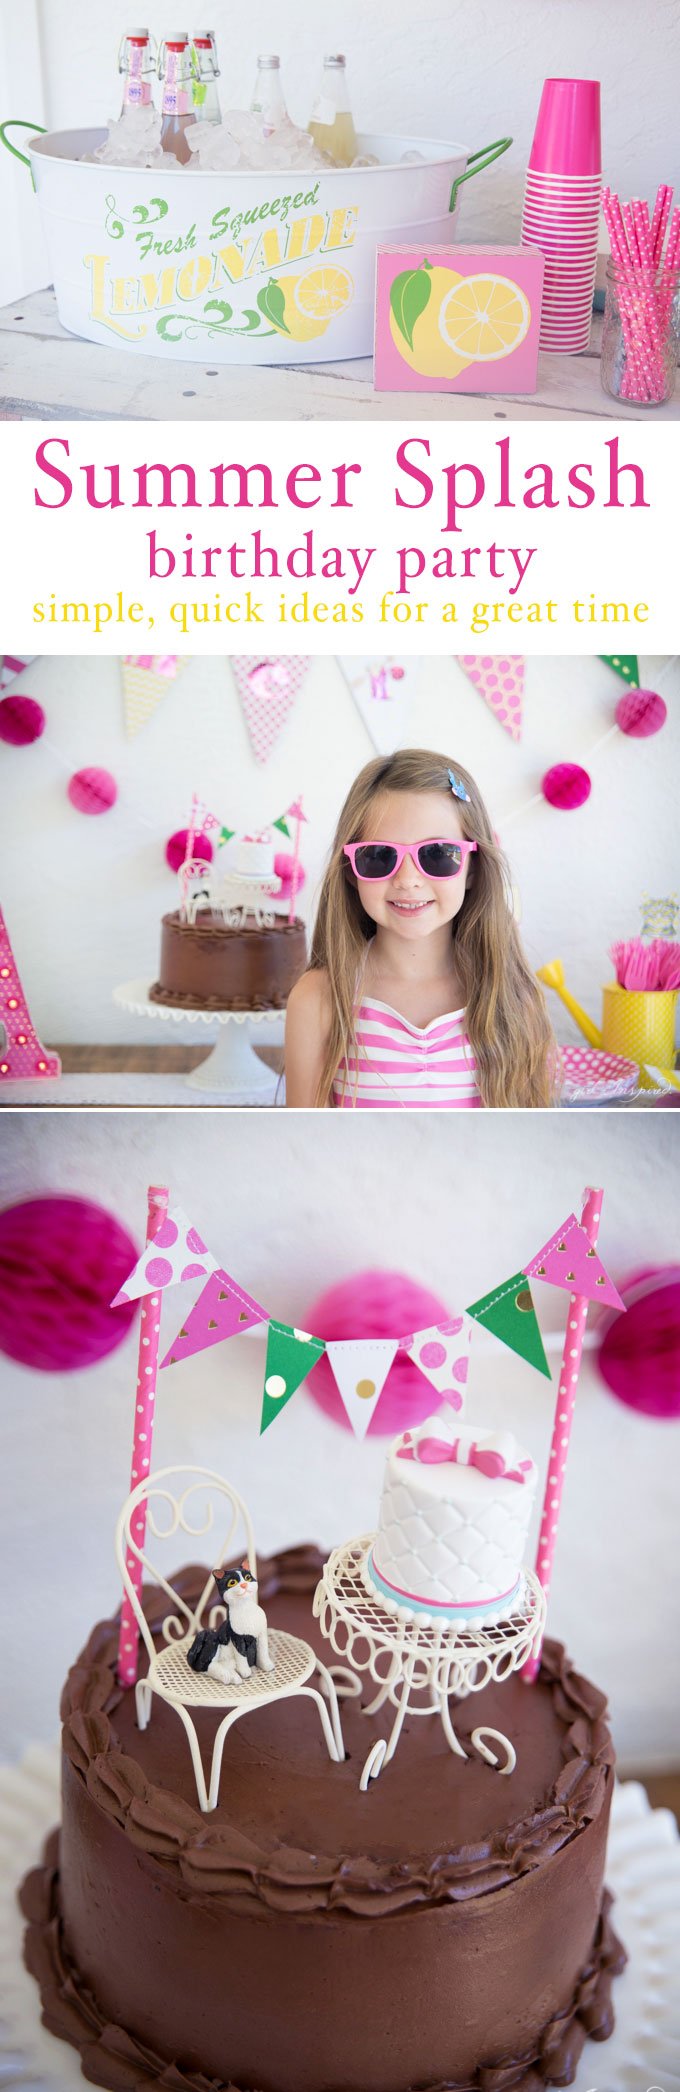 Summer Splash Birthday Party - simple ideas for pulling together a great party with very little planning. 